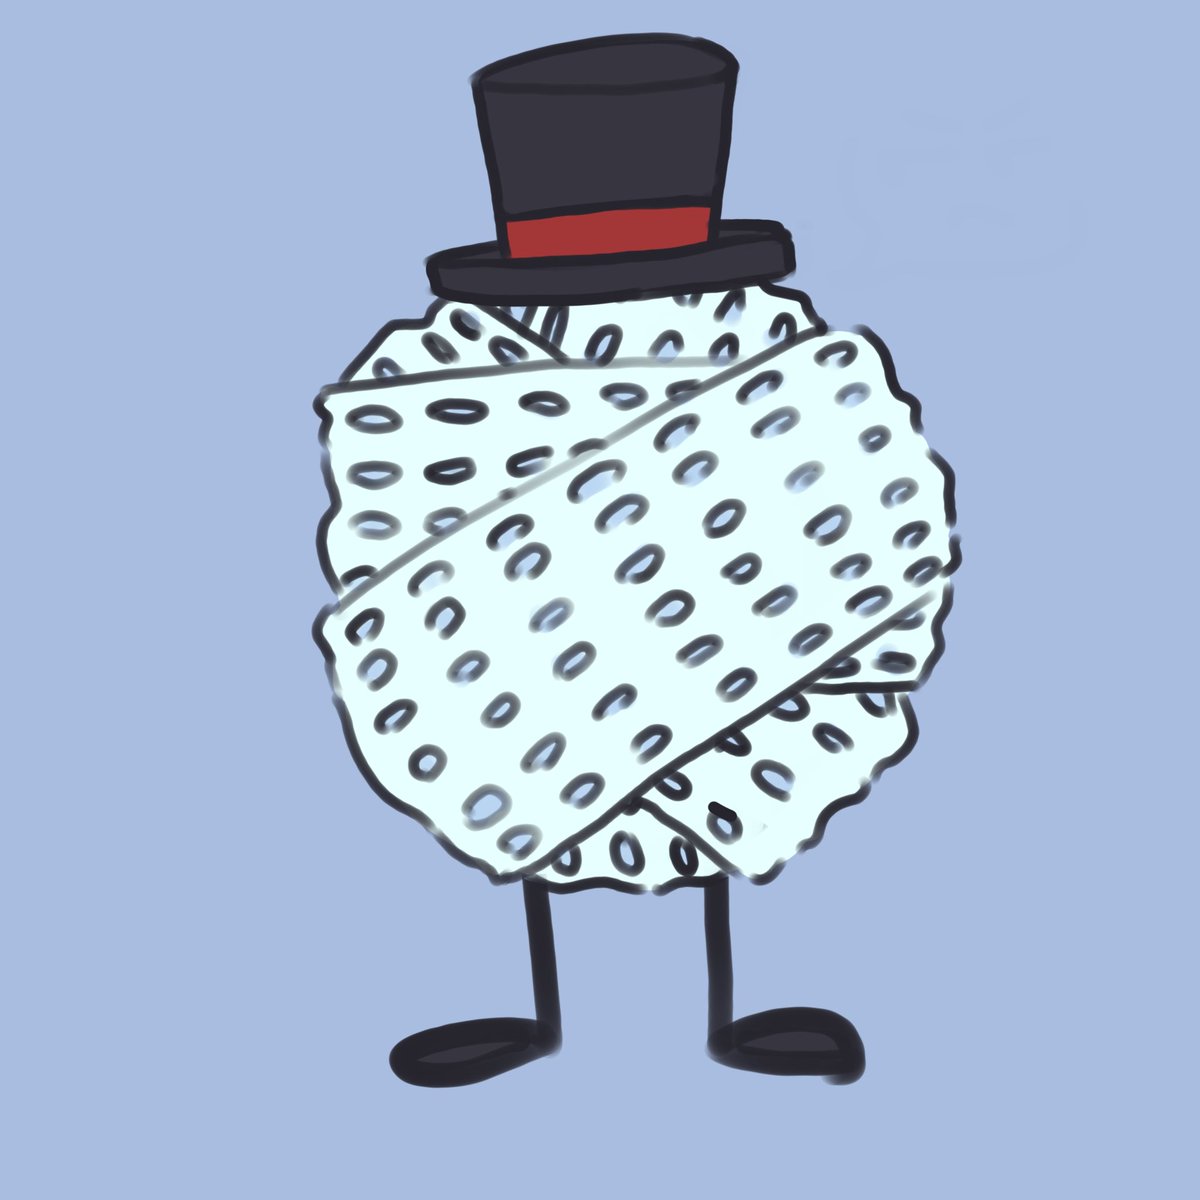 Rate dapper’s new fit (he’s never going outside without bubble wrap again)